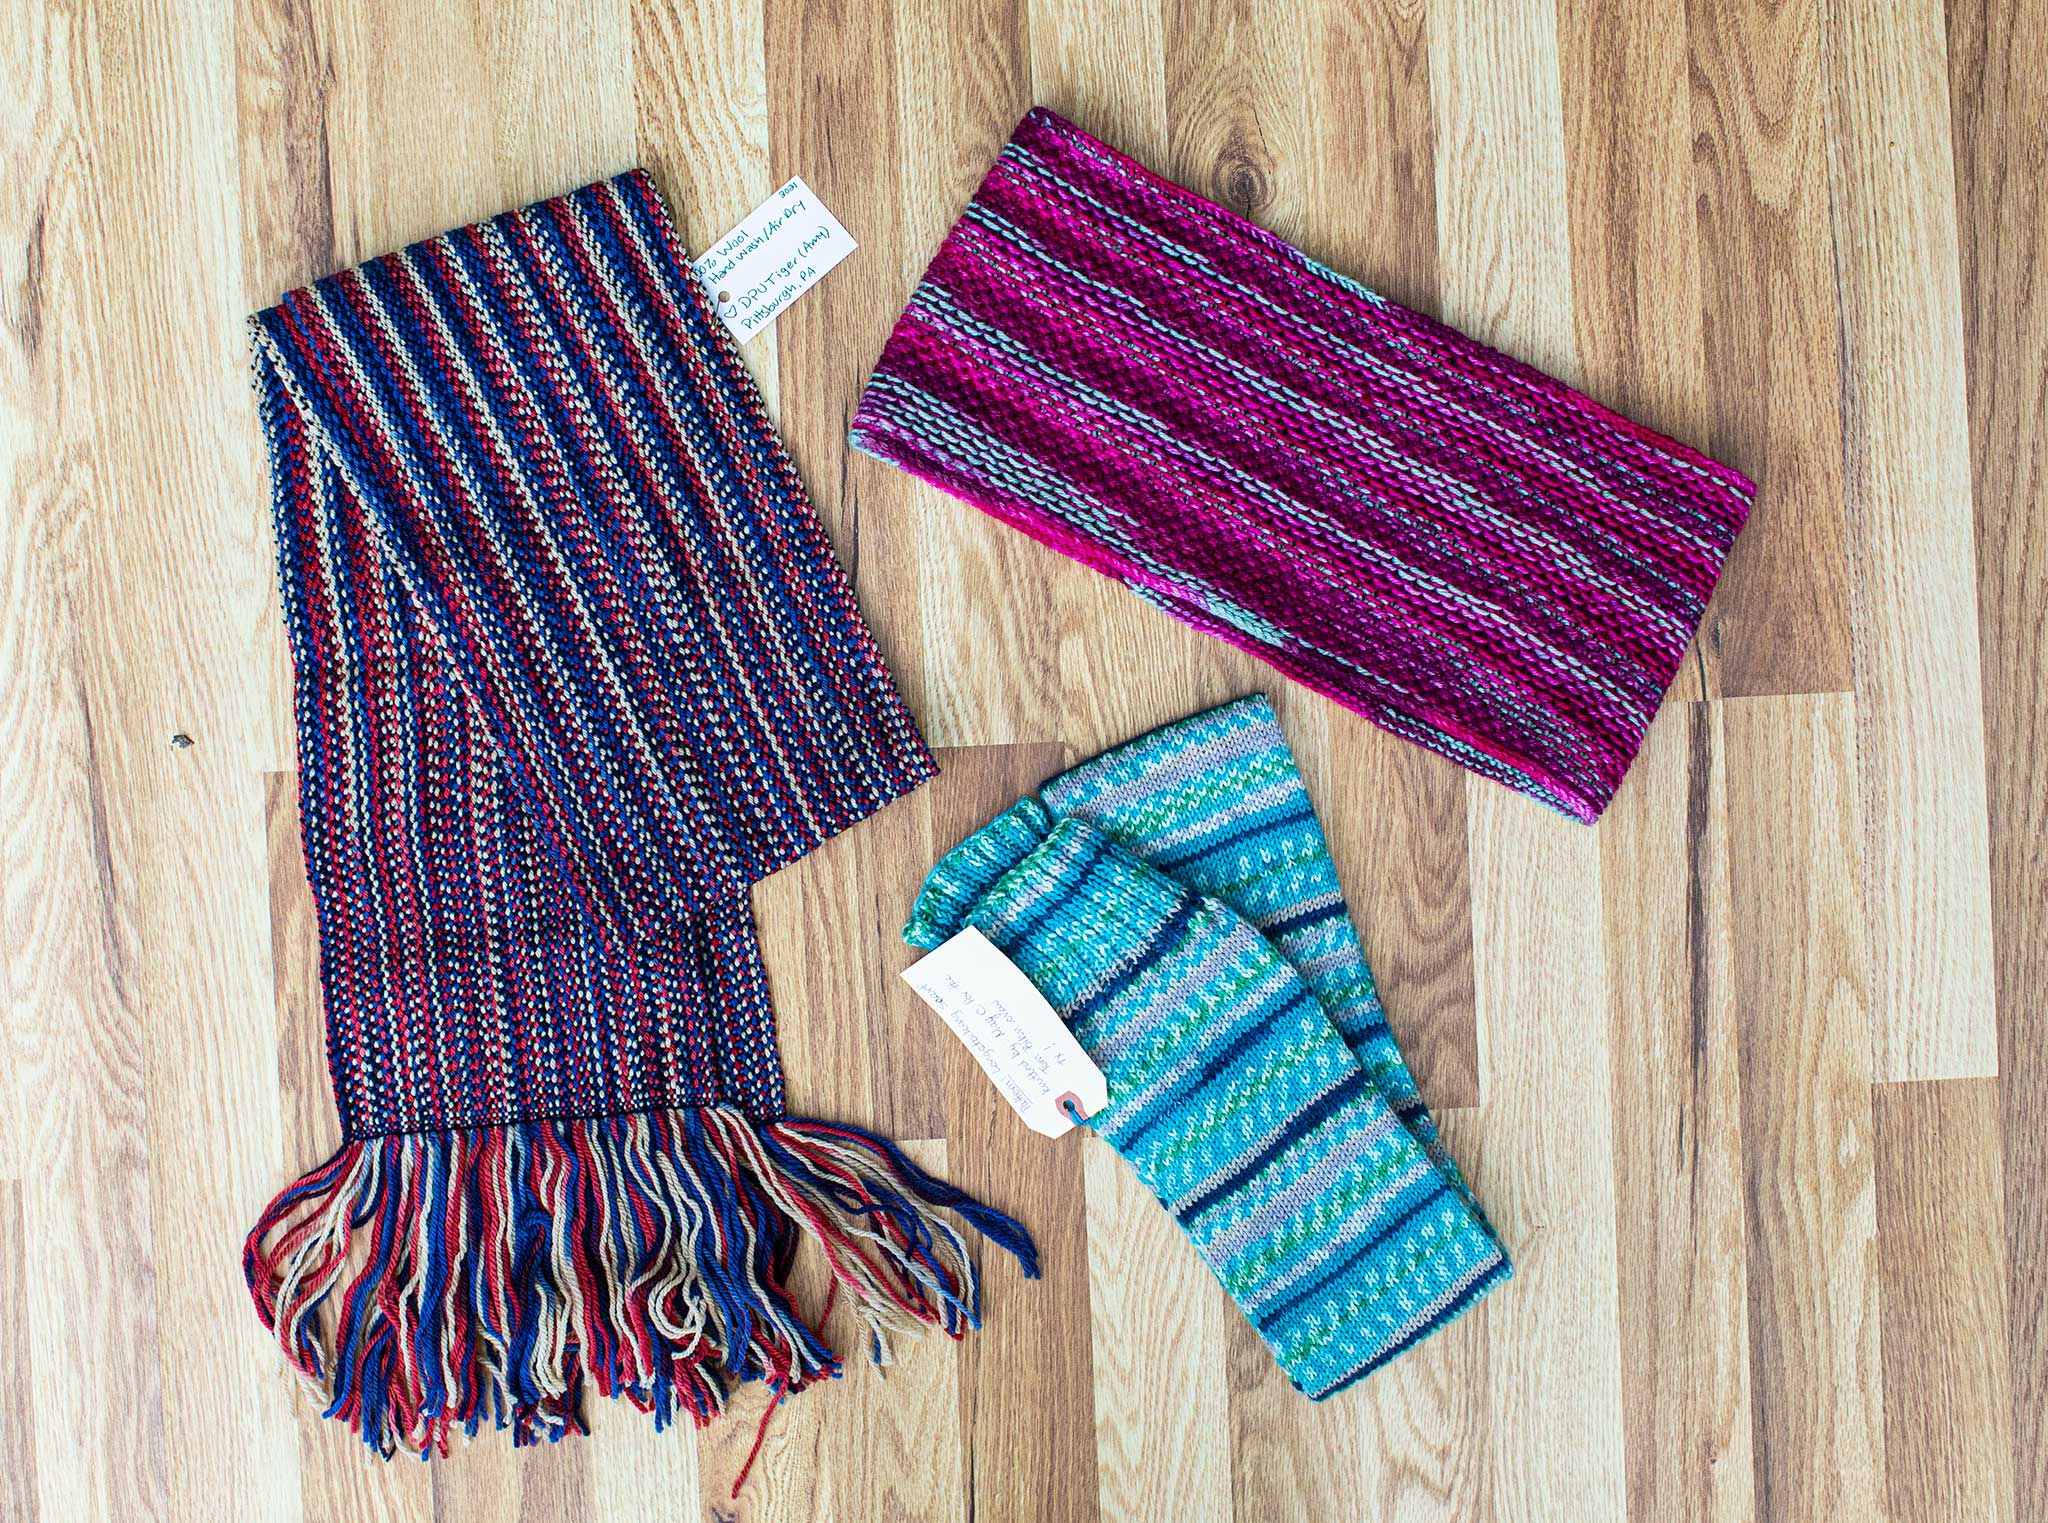 Three crafted items, clockwise from upper right: a vibrant Magenta cowl, a stripy blue scarf, and a scarf in blue/red/green/purple.